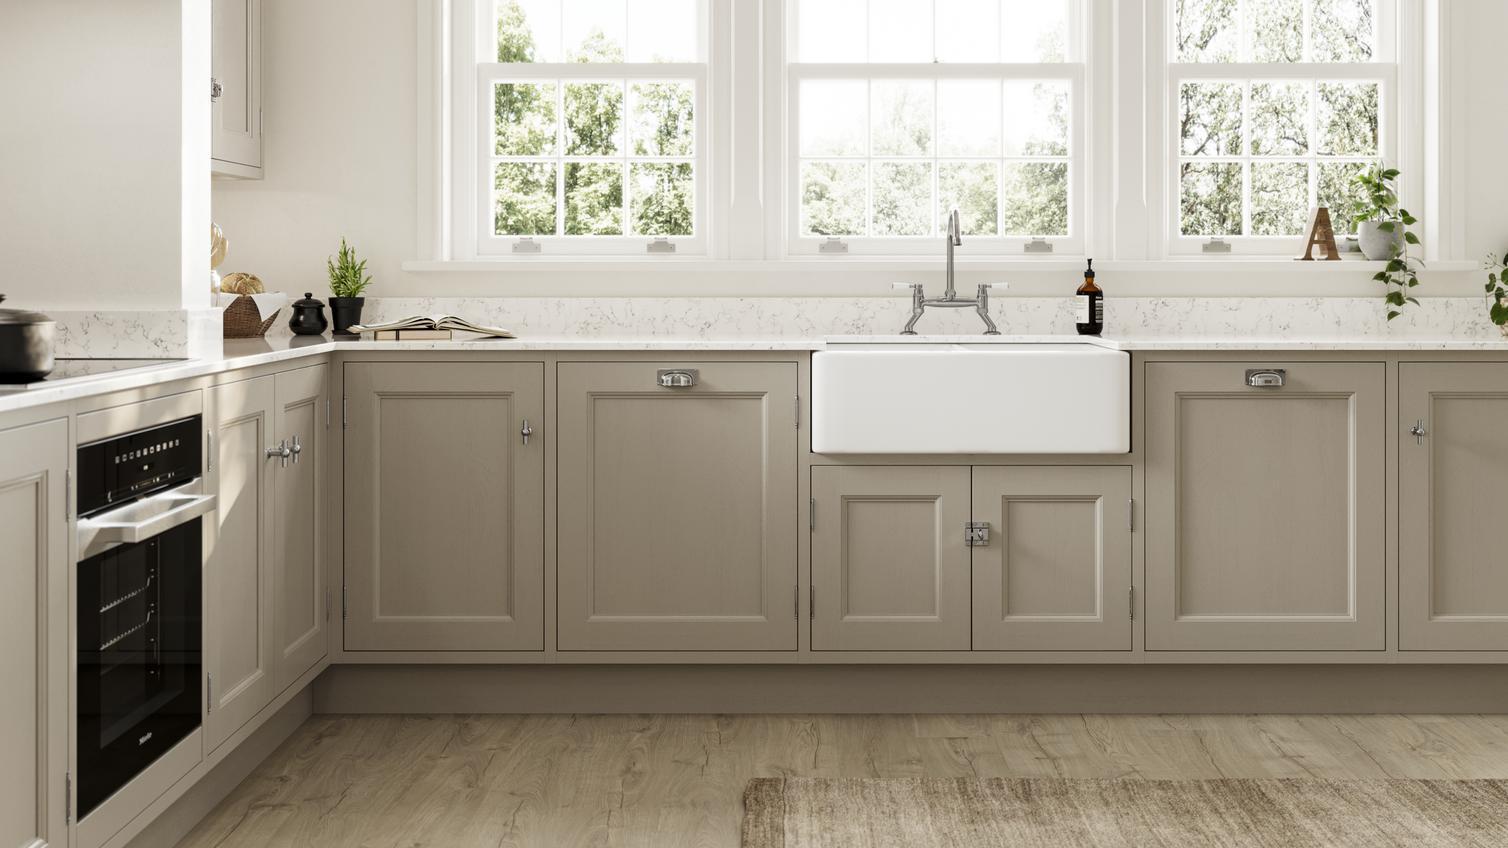 A heritage elmbridge kitchen with an in frame design